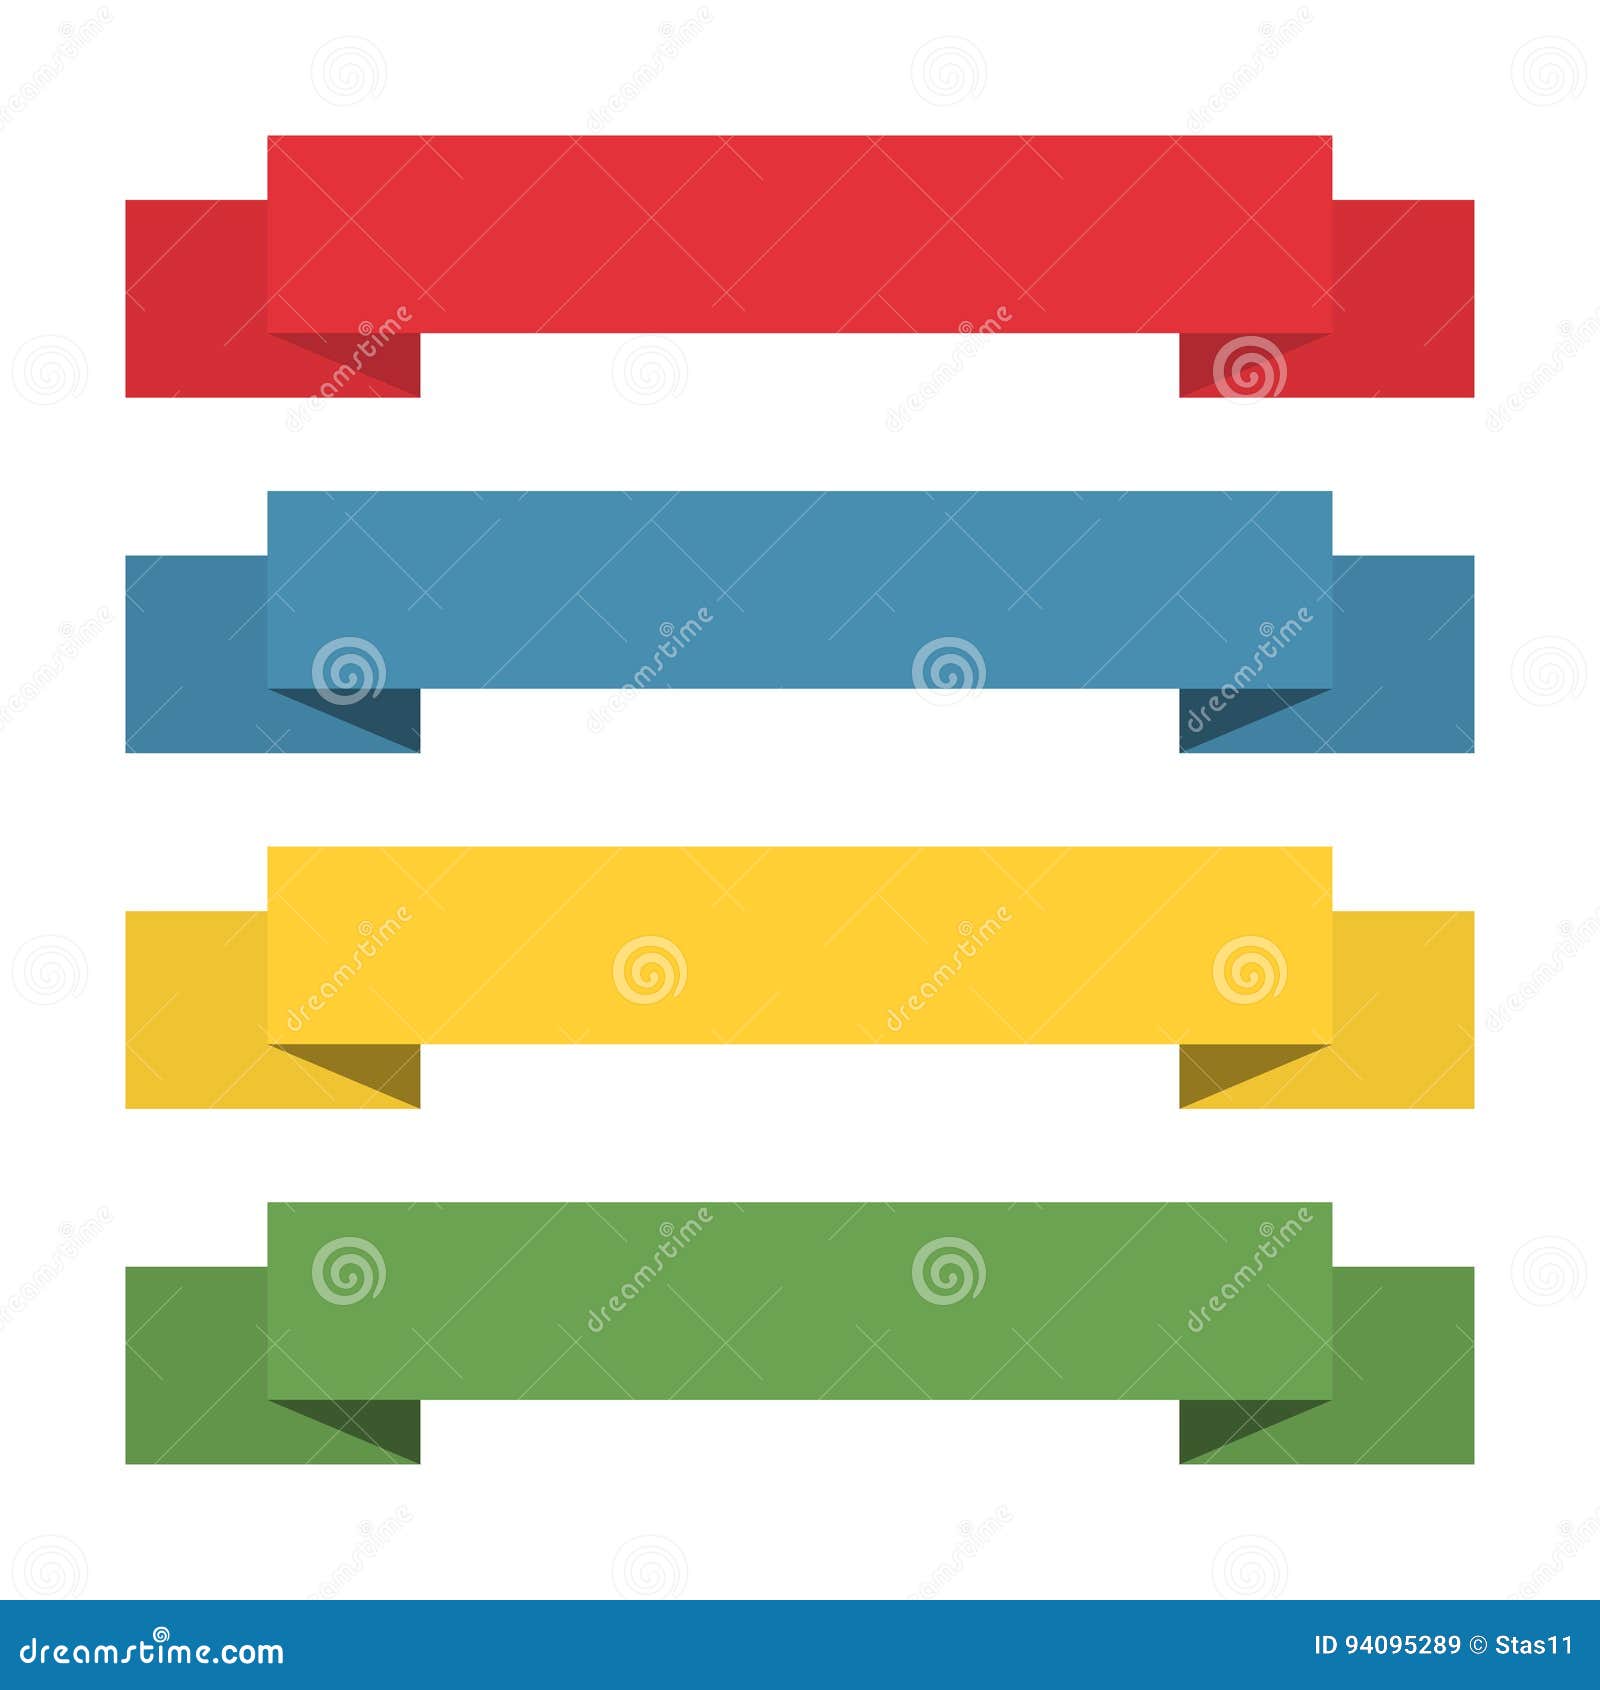 Flat Ribbons Banners. Ribbons in Flat Design Stock Illustration ...